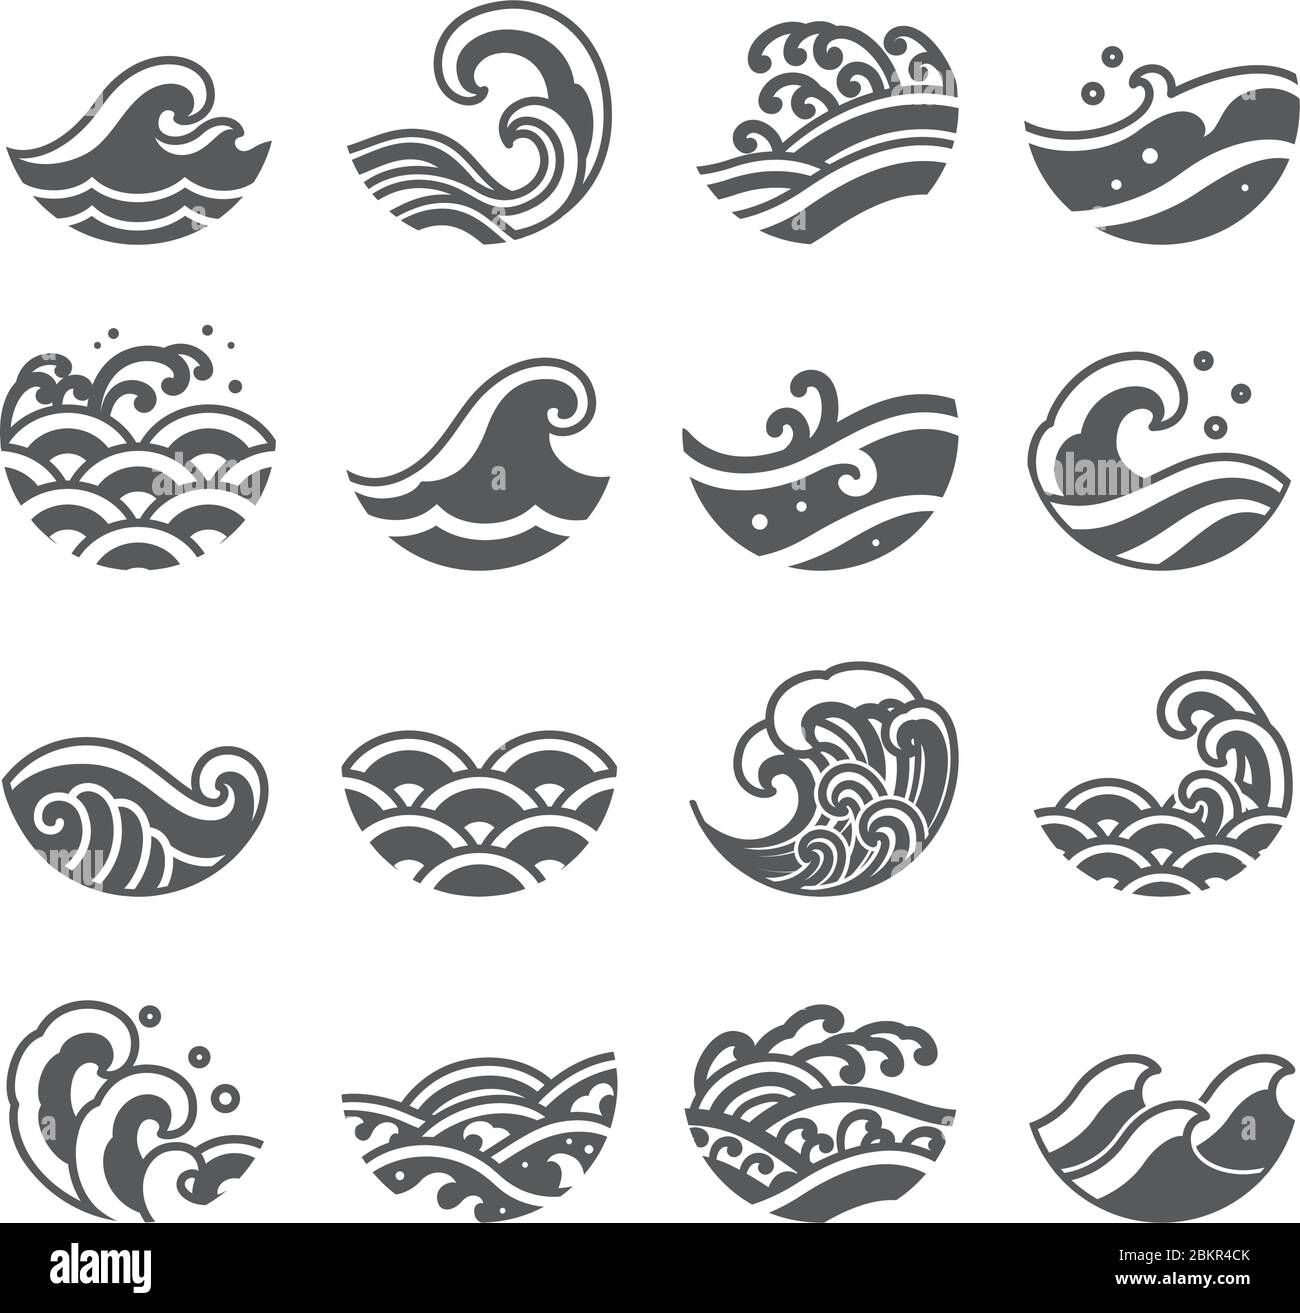 Set of ocean wave icon vector. Modern and traditional sea wave style for logo, surf sports, tattoo. Stock Vector